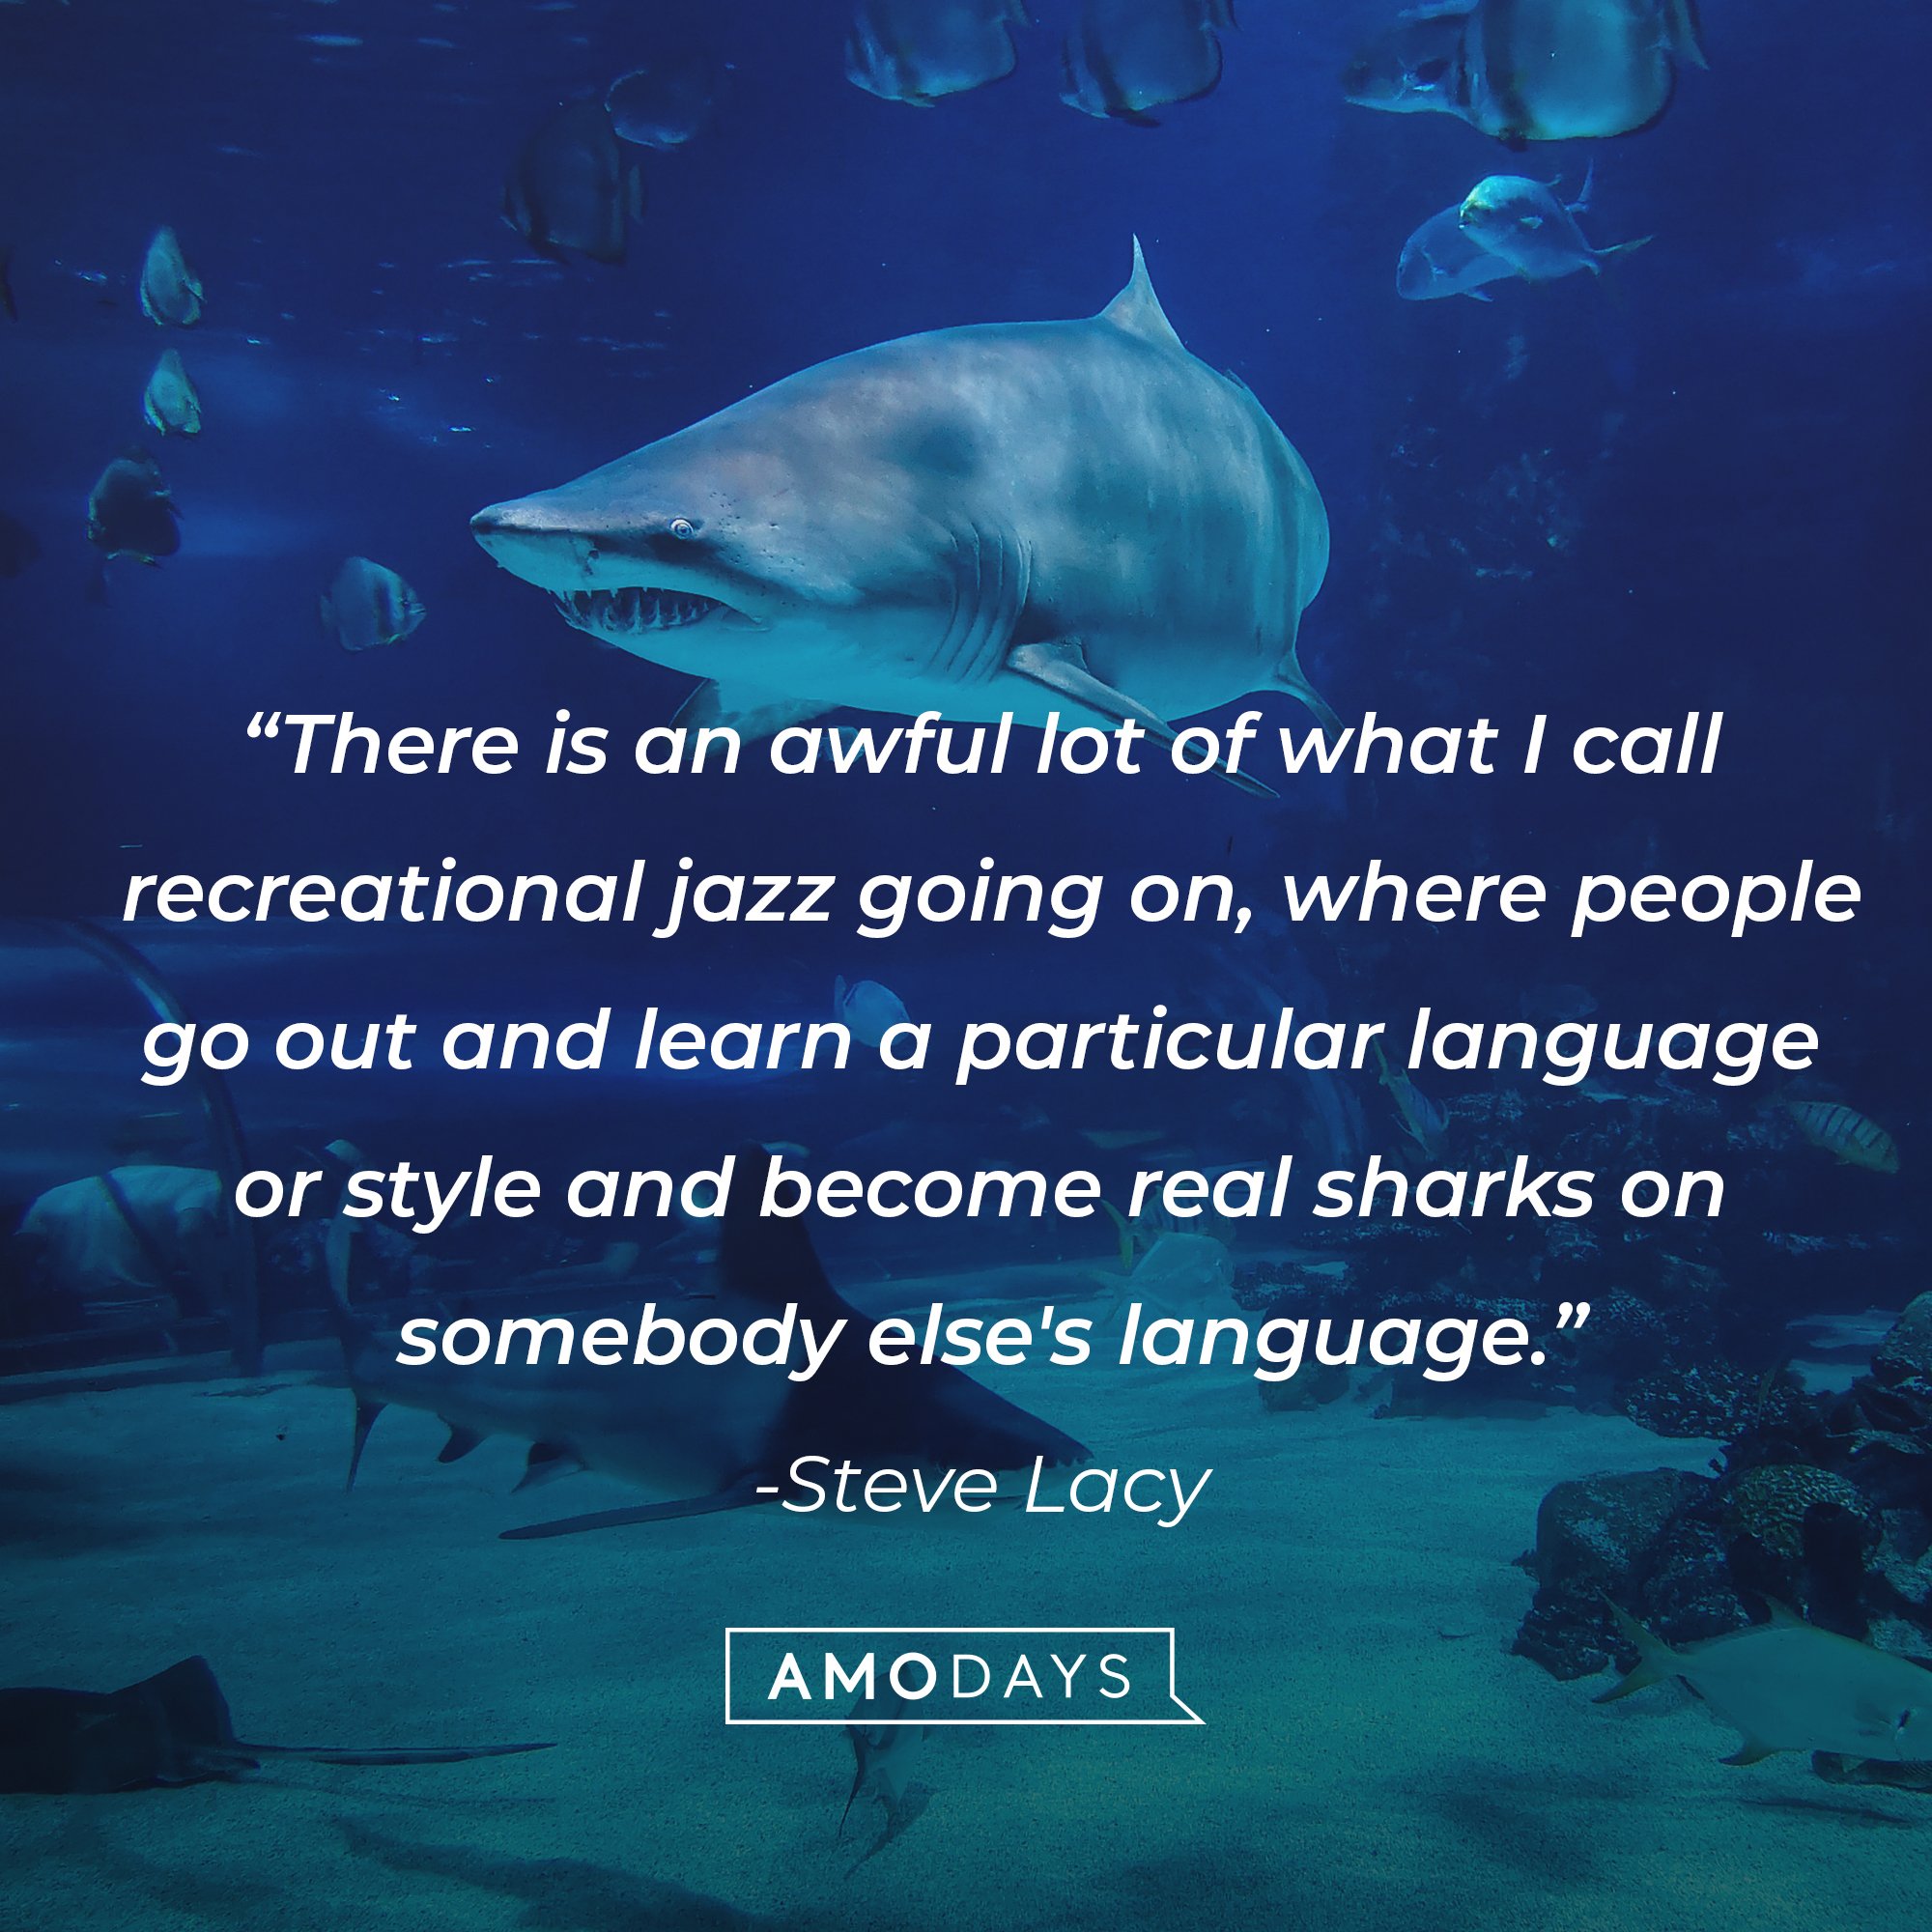 Steve Lacy's quote: “There is an awful lot of what I call recreational jazz going on, where people go out and learn a particular language or style and become real sharks on somebody else's language.” | Image: AmoDays